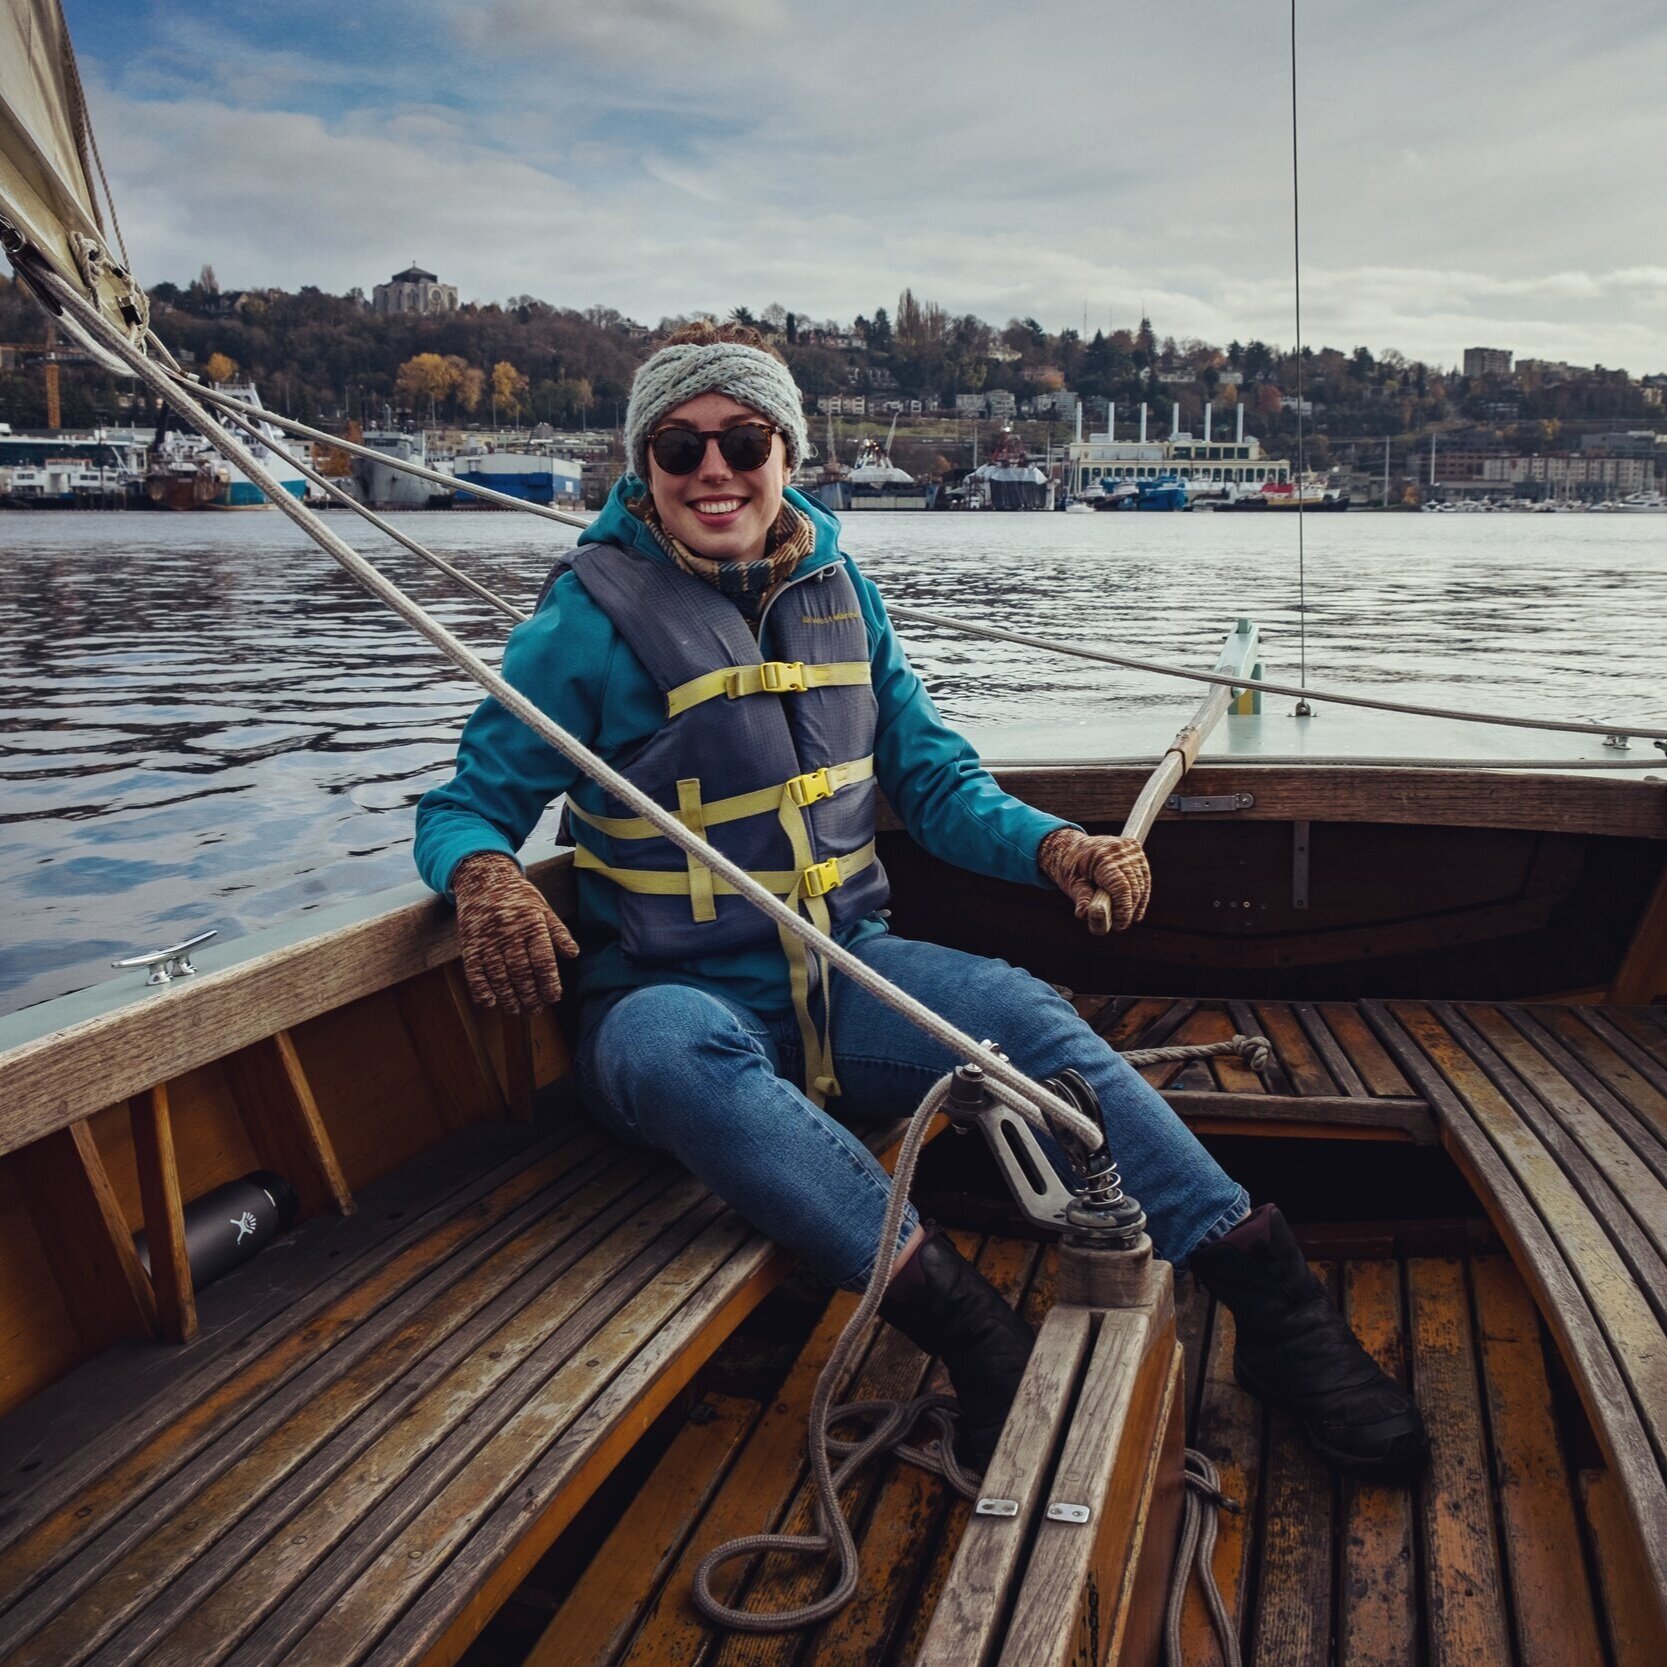 Anna Coumou sailing a small wooden boat